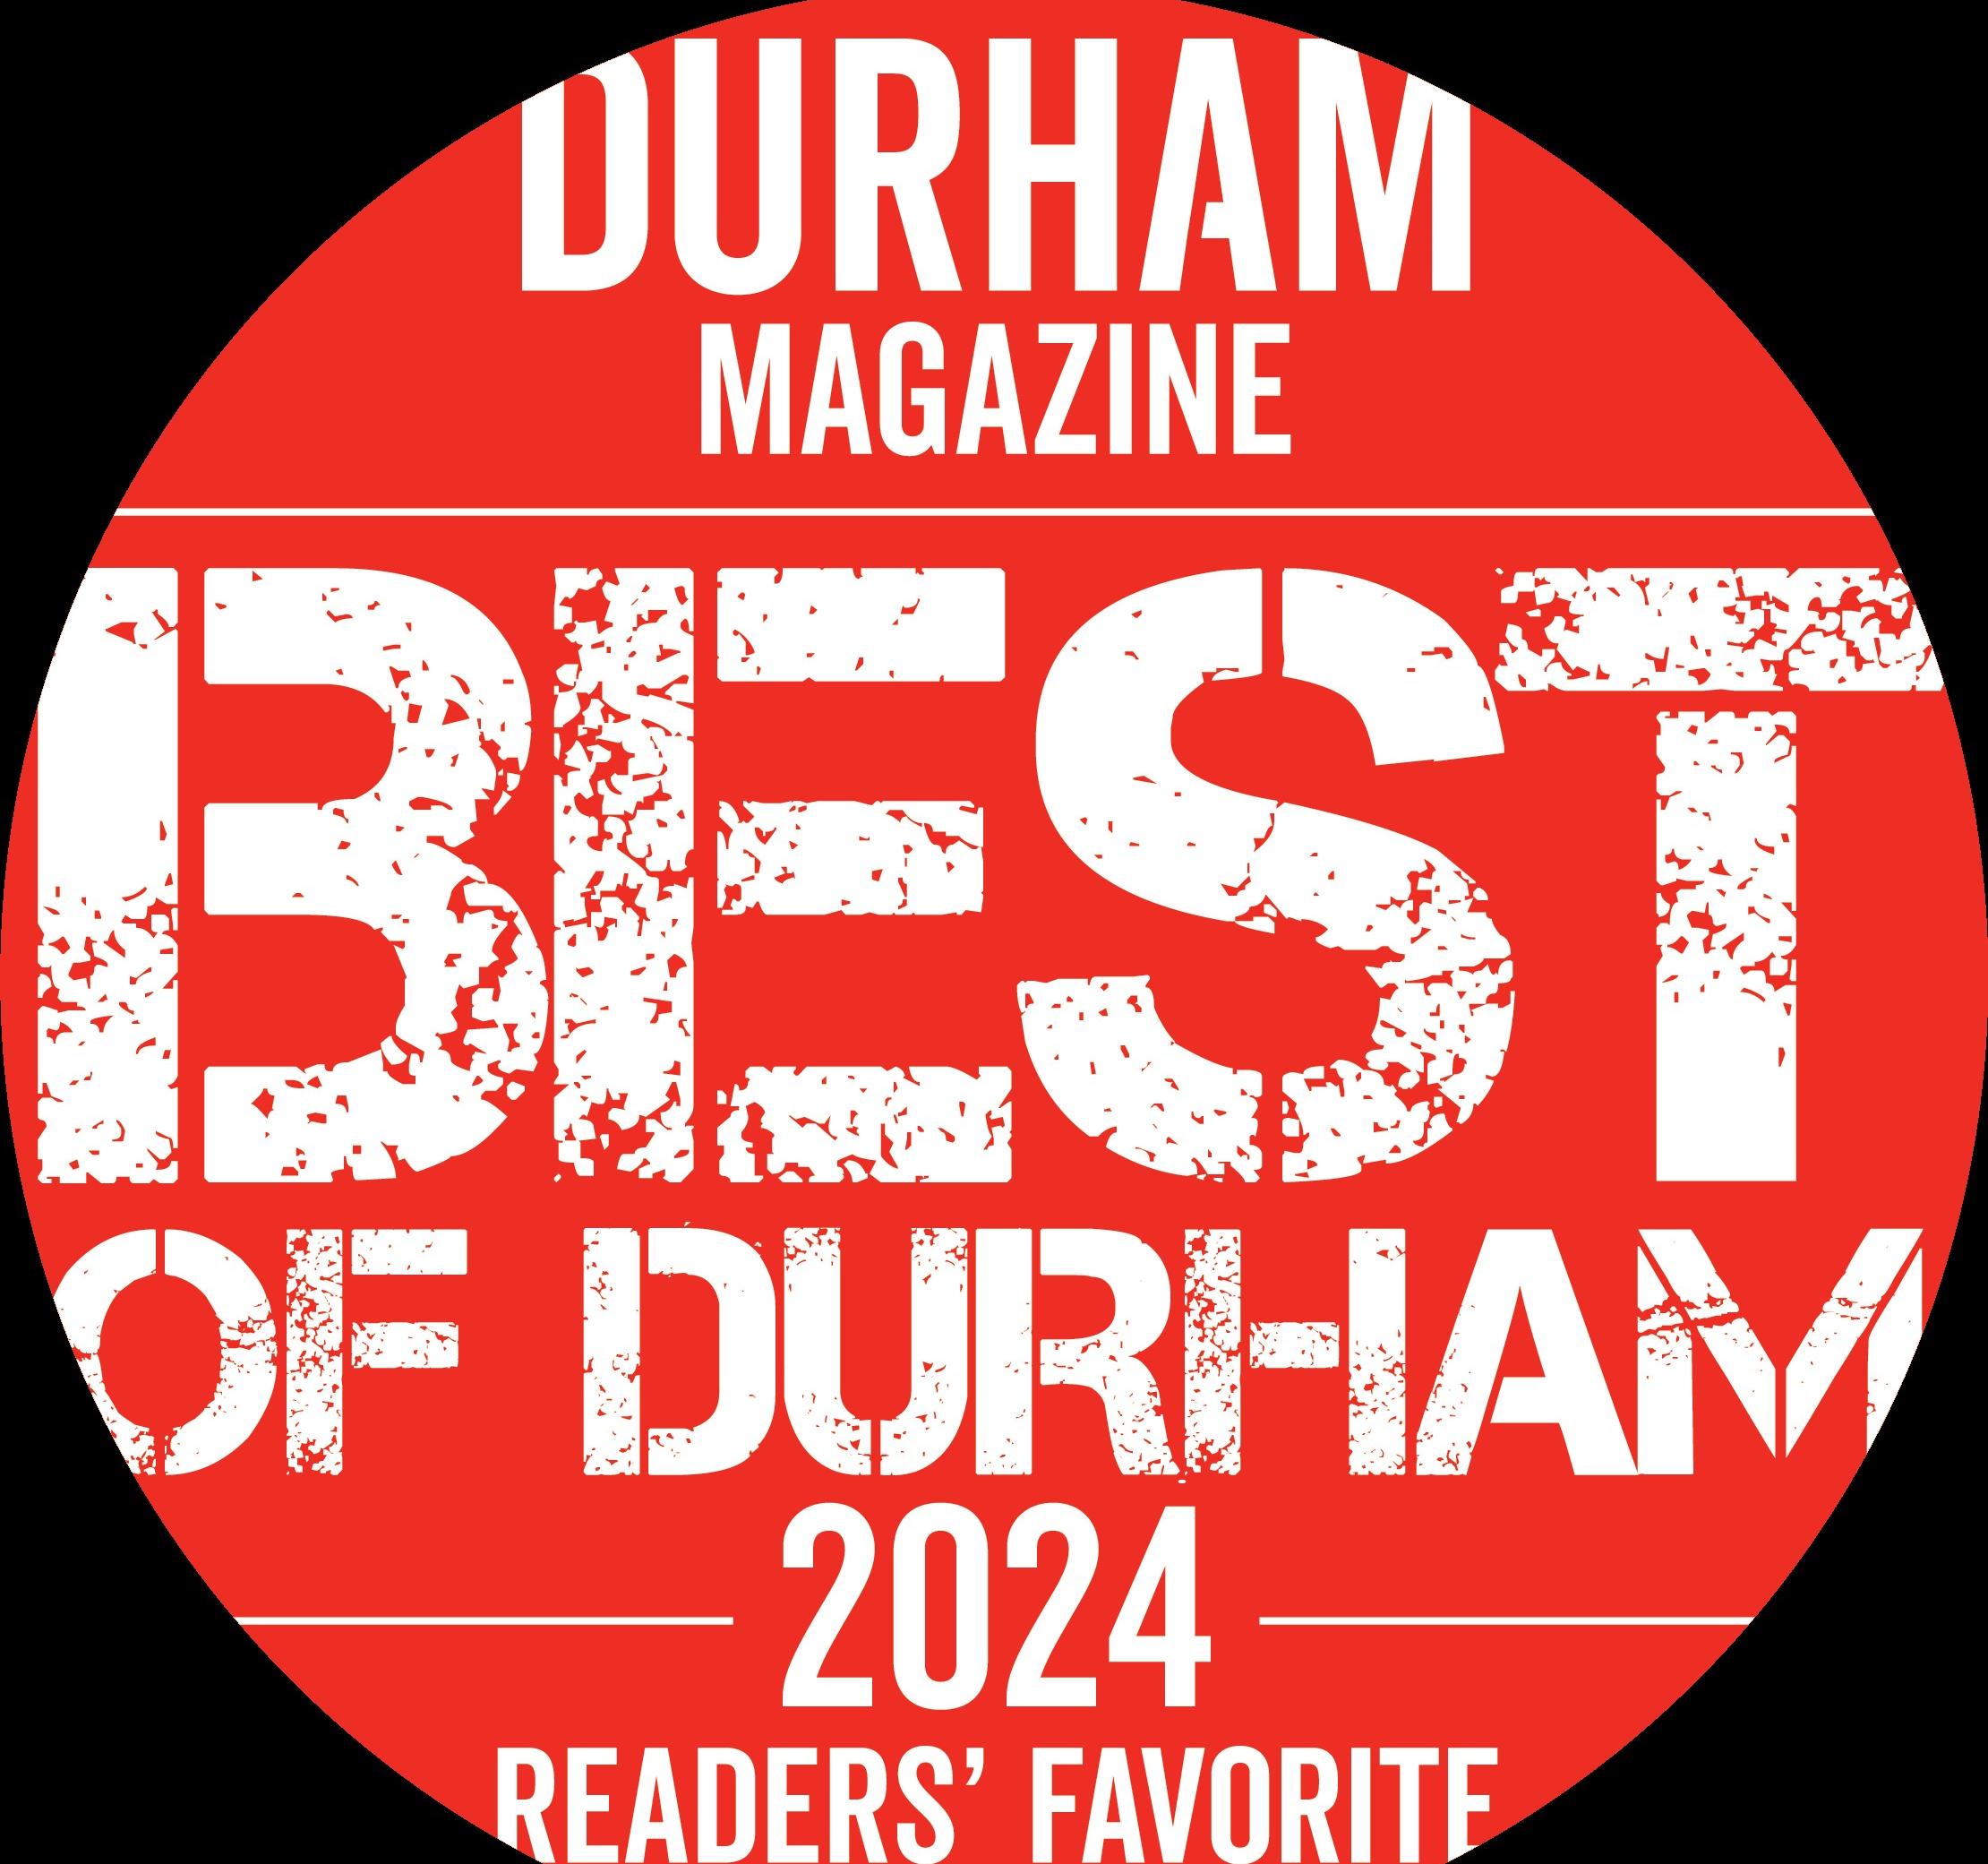 Winning Best Of awards is a regular occurrence when your movers are as good as ours!  Thank you to the readers of Durham magazine!